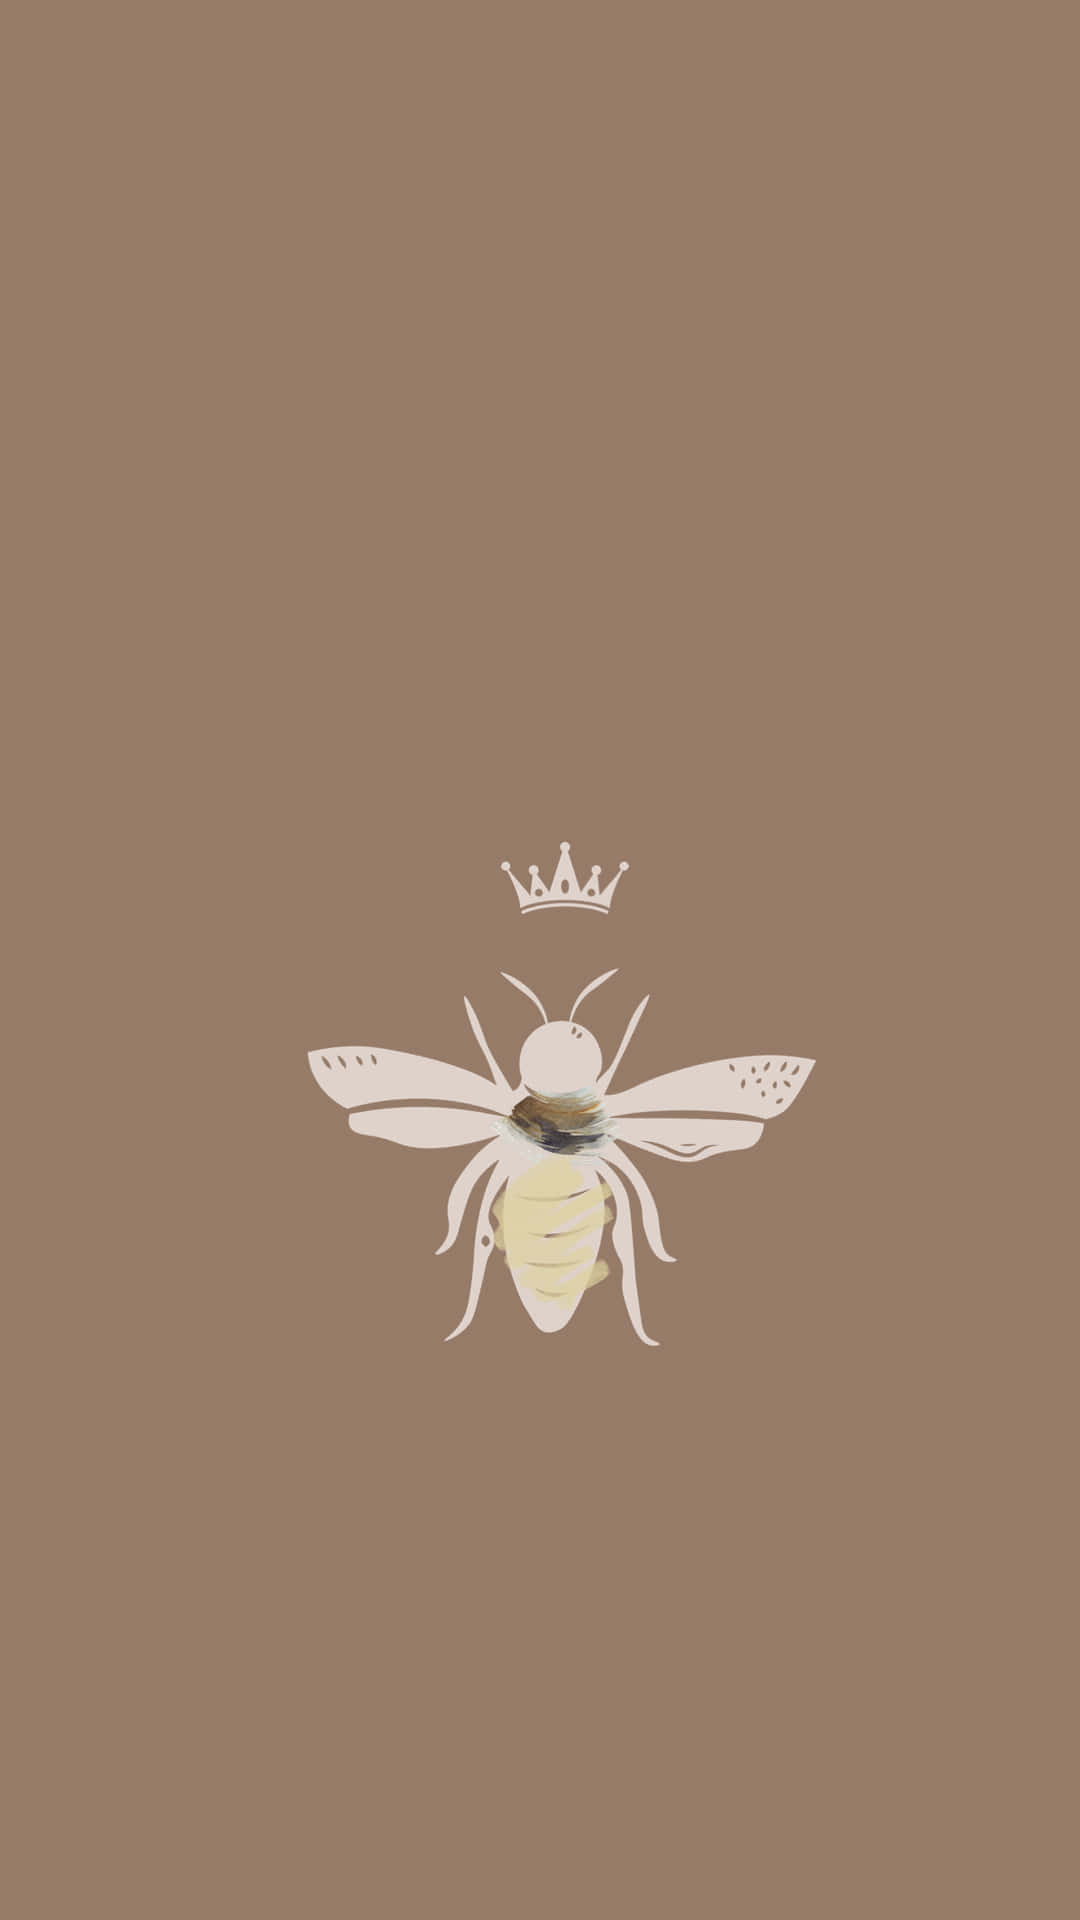 A Bee With A Crown On A Brown Background Wallpaper